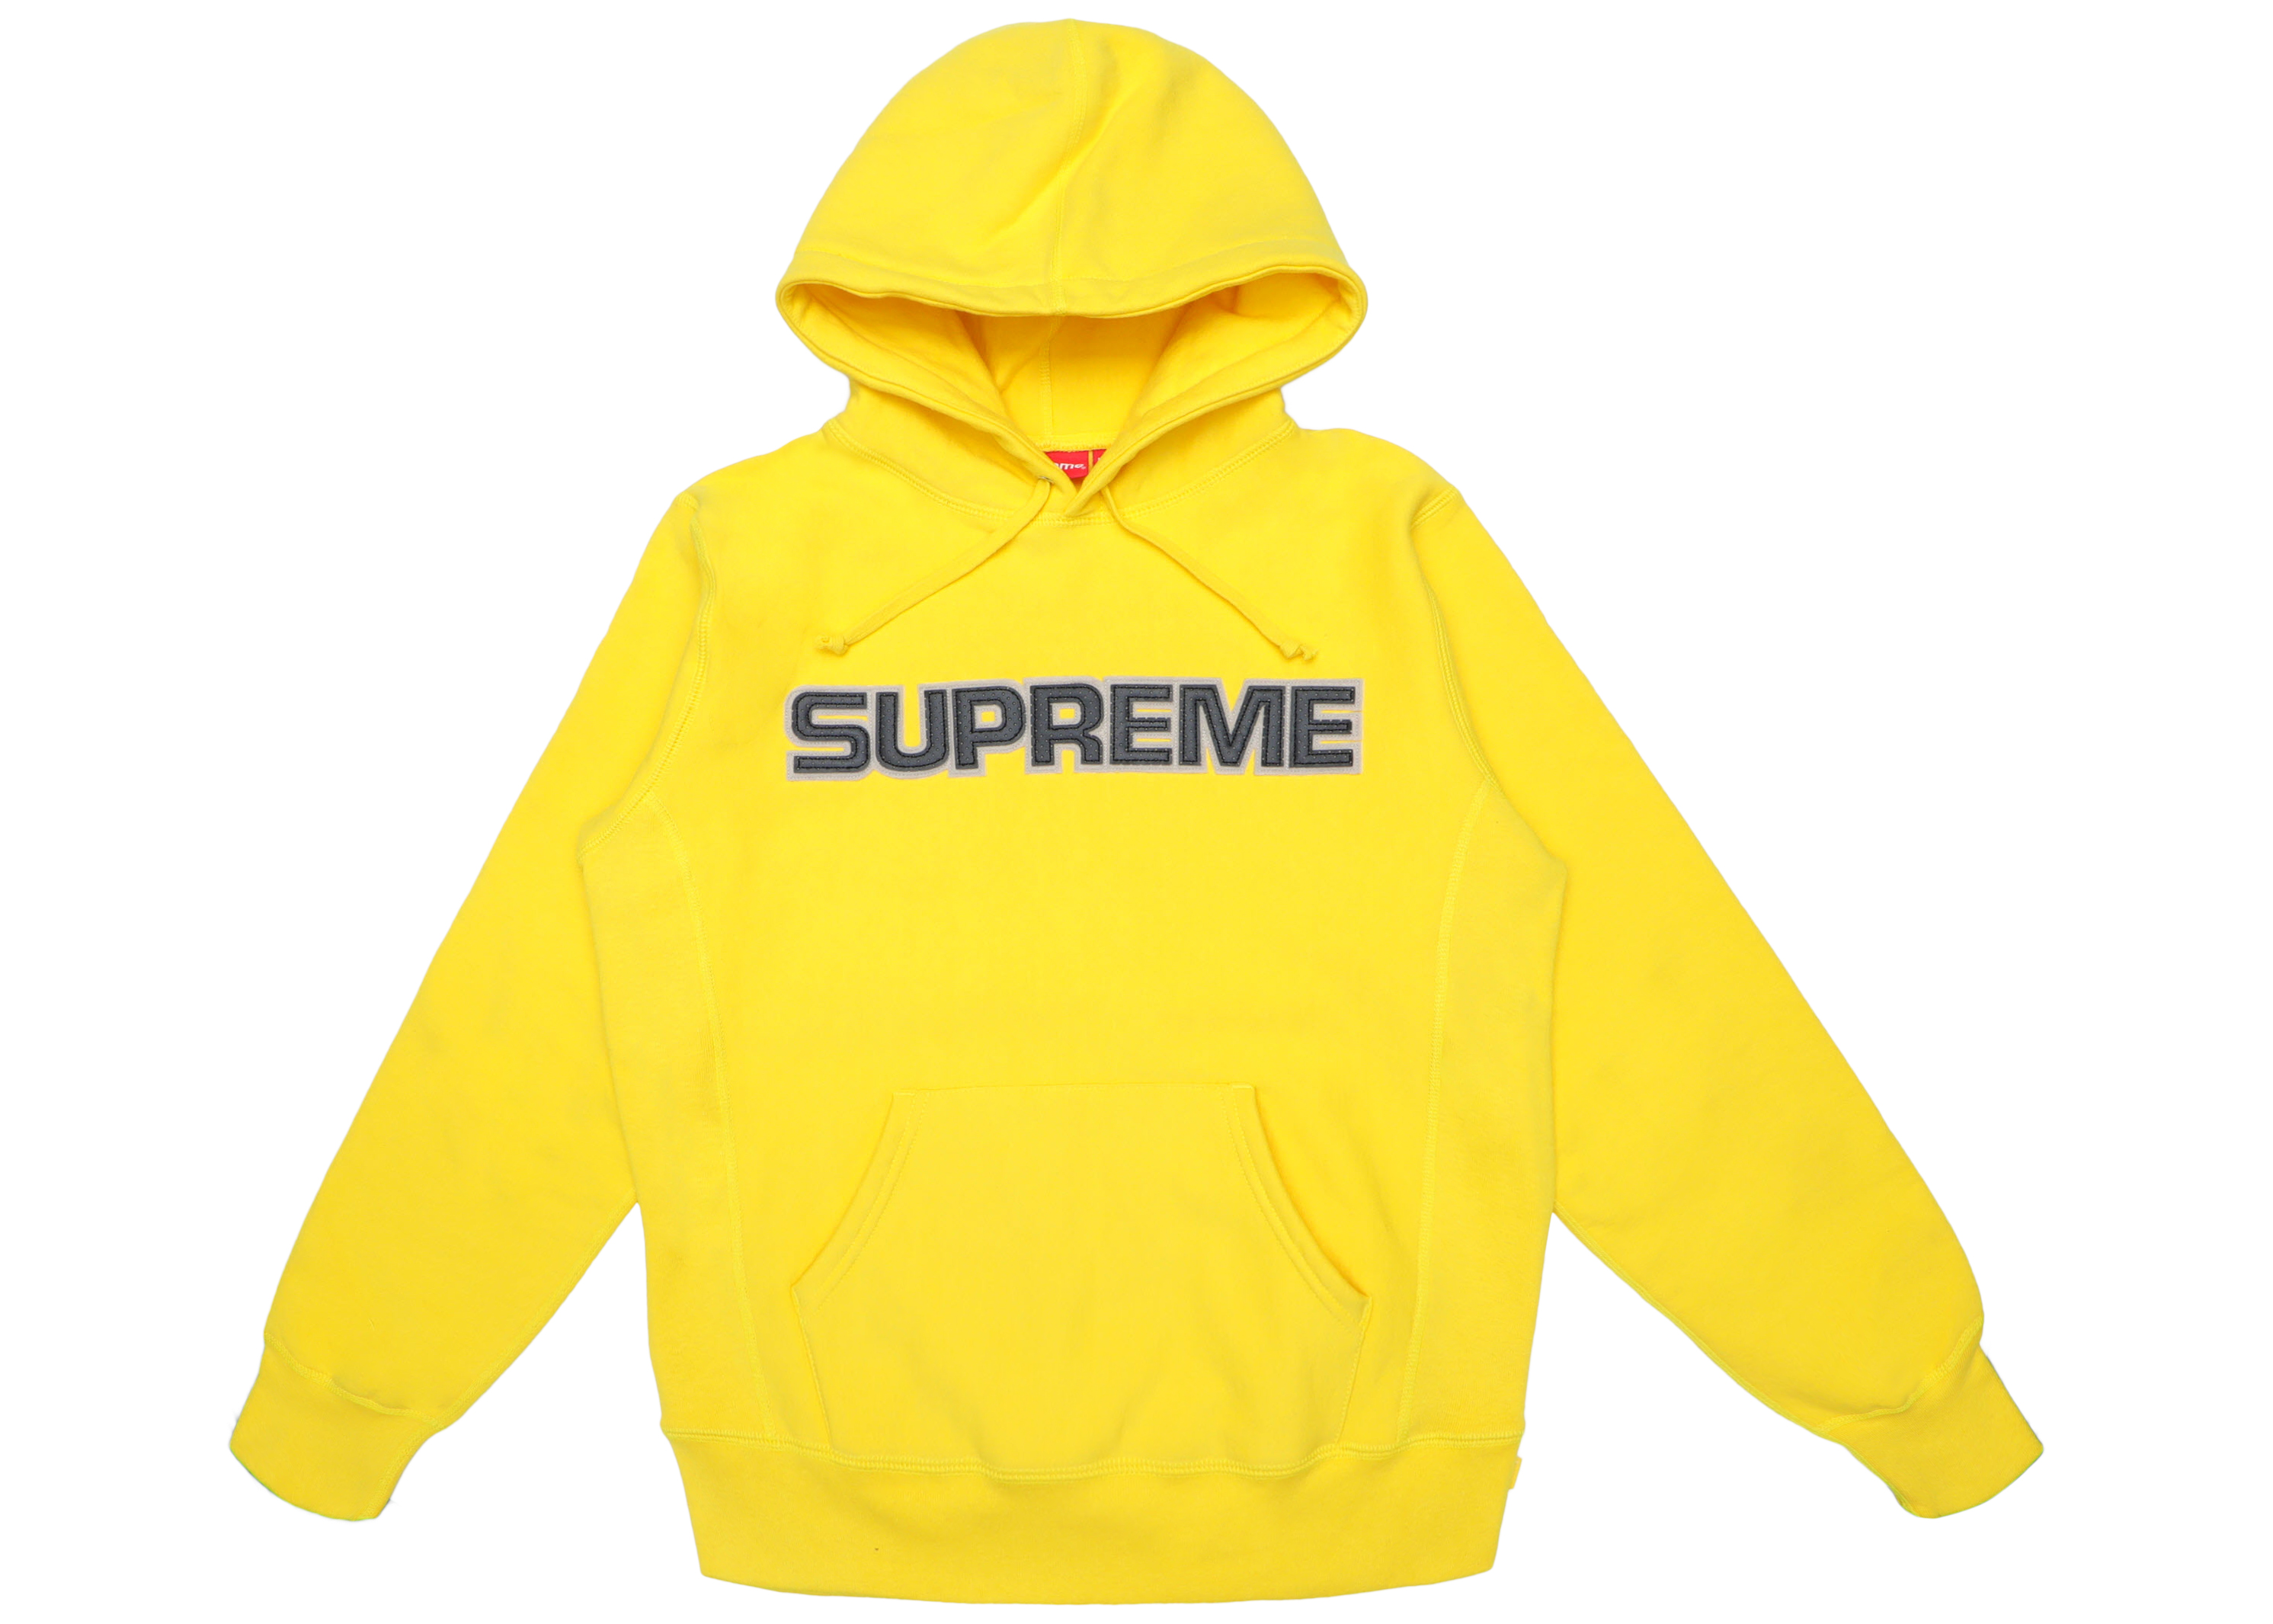 Supreme Perforated Leather Hooded